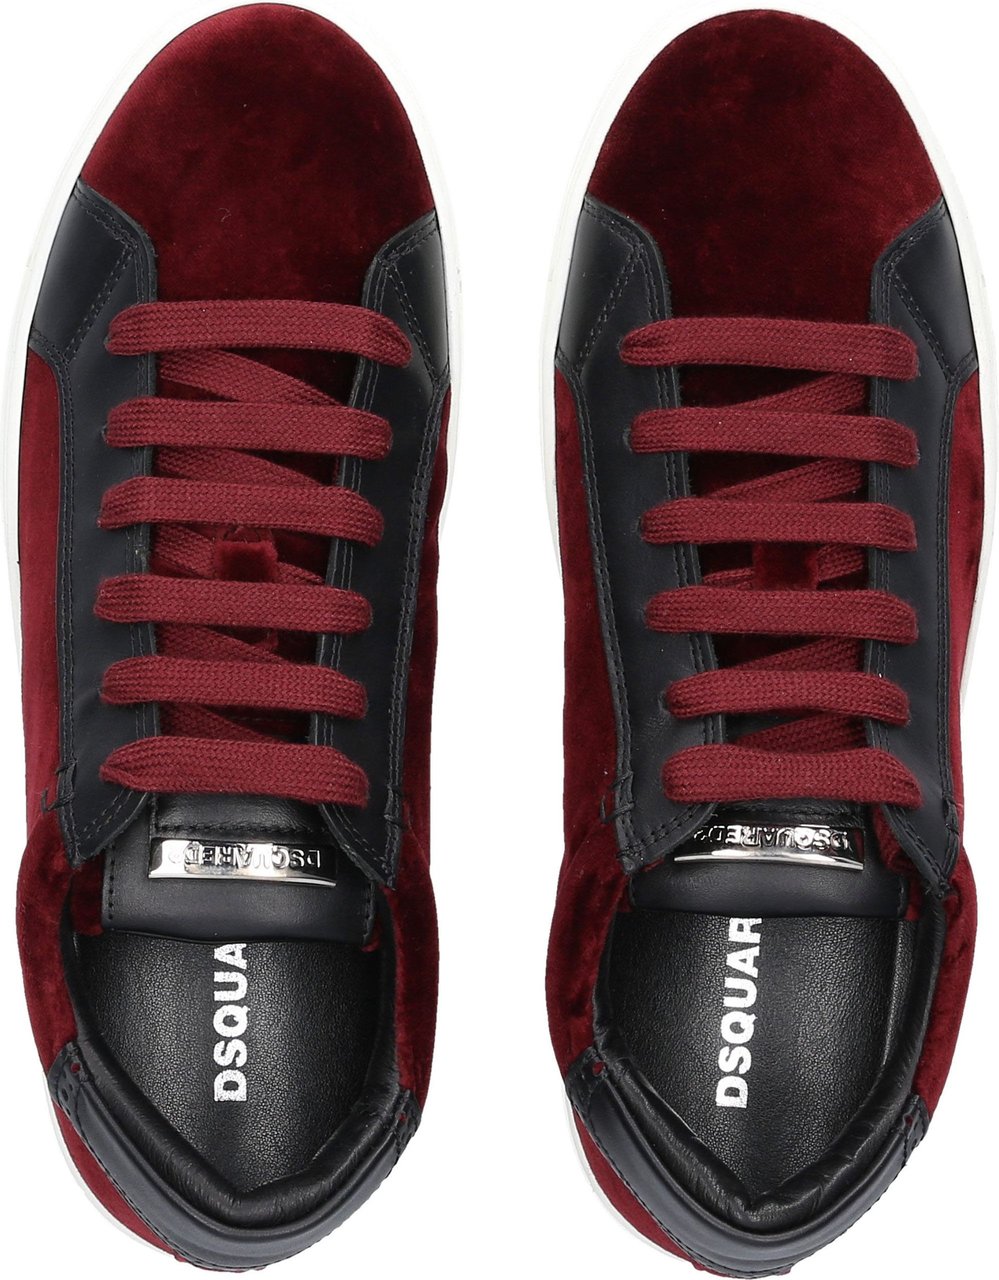 Dsquared2 Women Low-Top Sneakers TENNIS CLUB - Lenny Rood